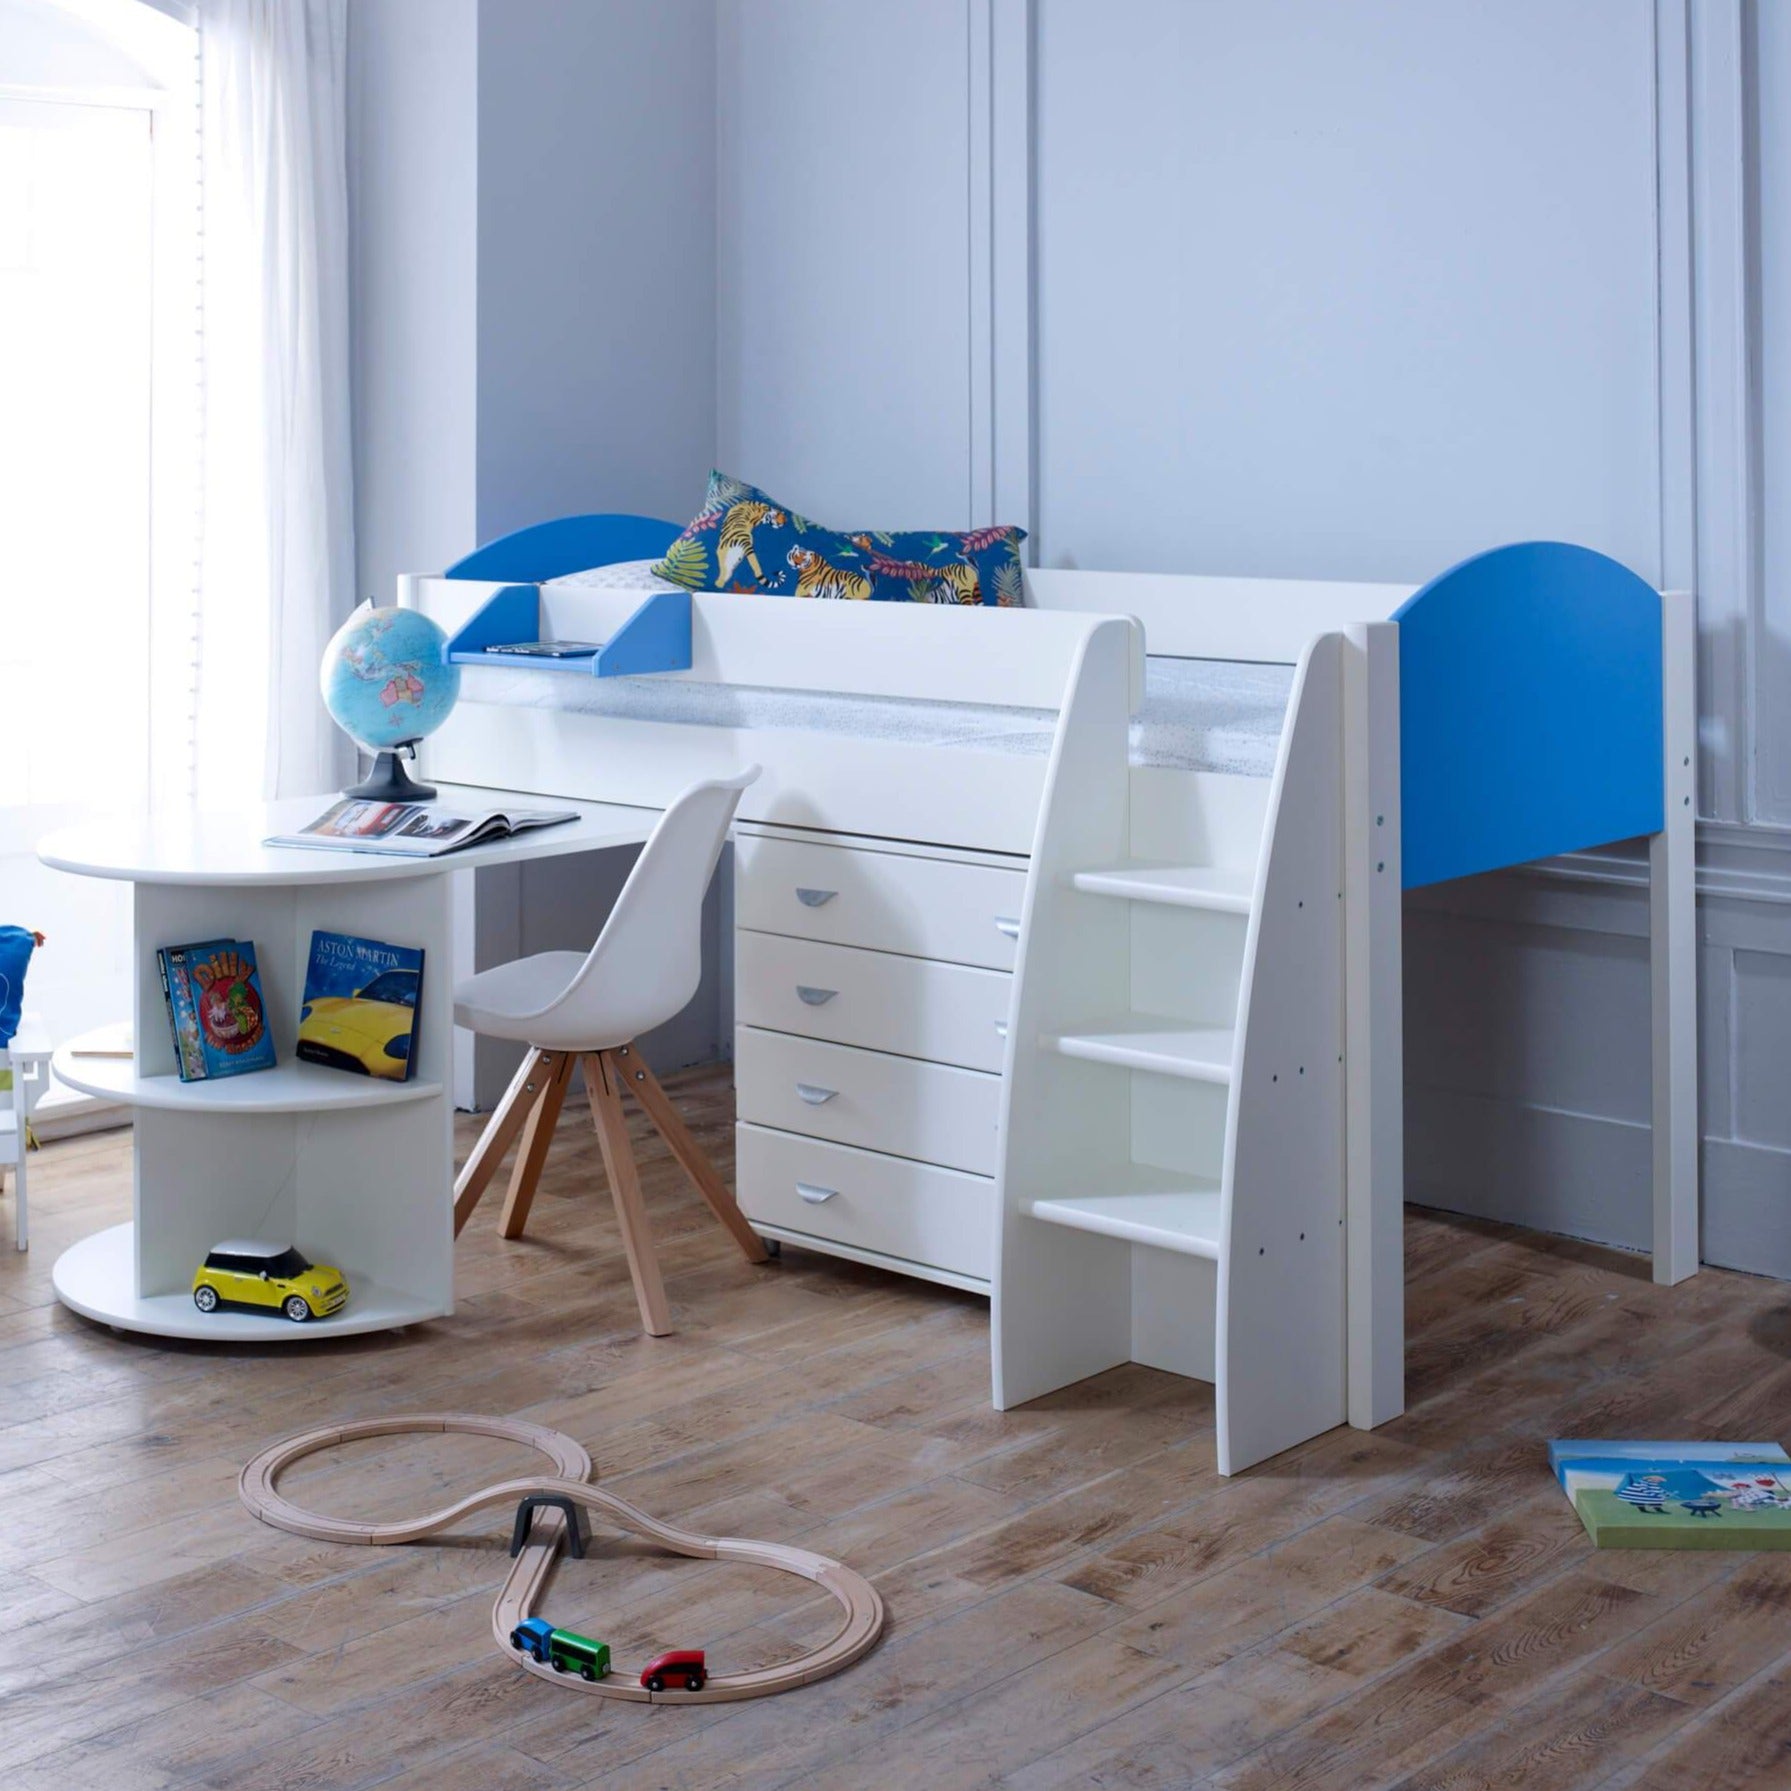 Evan Sky Blue Mid Sleeper Bed with Pull Out Desk & Drawers - Desk Out